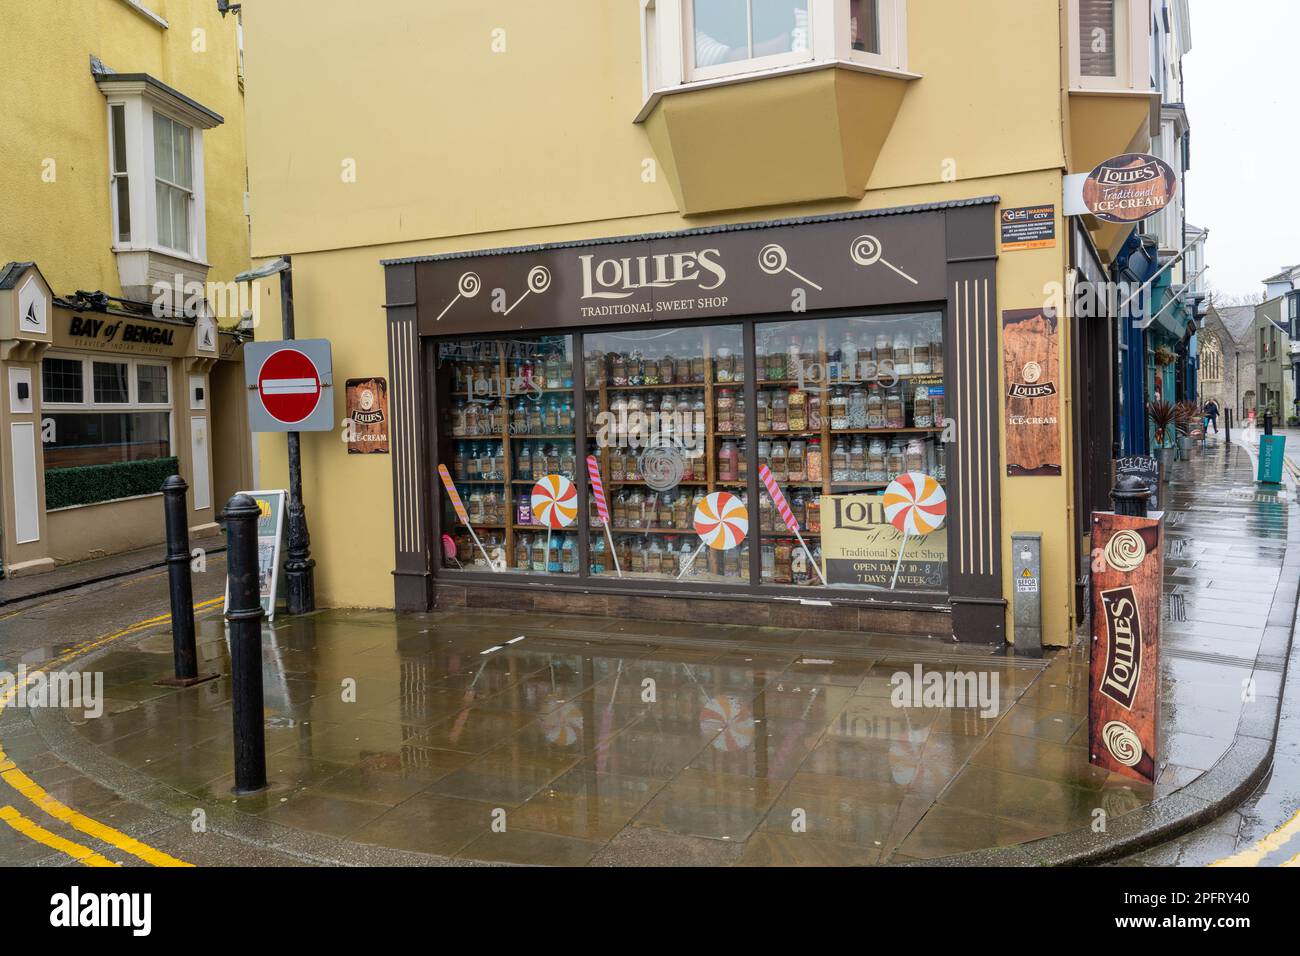 Lollies Traditional Sweet Shop, Tenby, Pembrokeshire, South West Wales Stock Photo